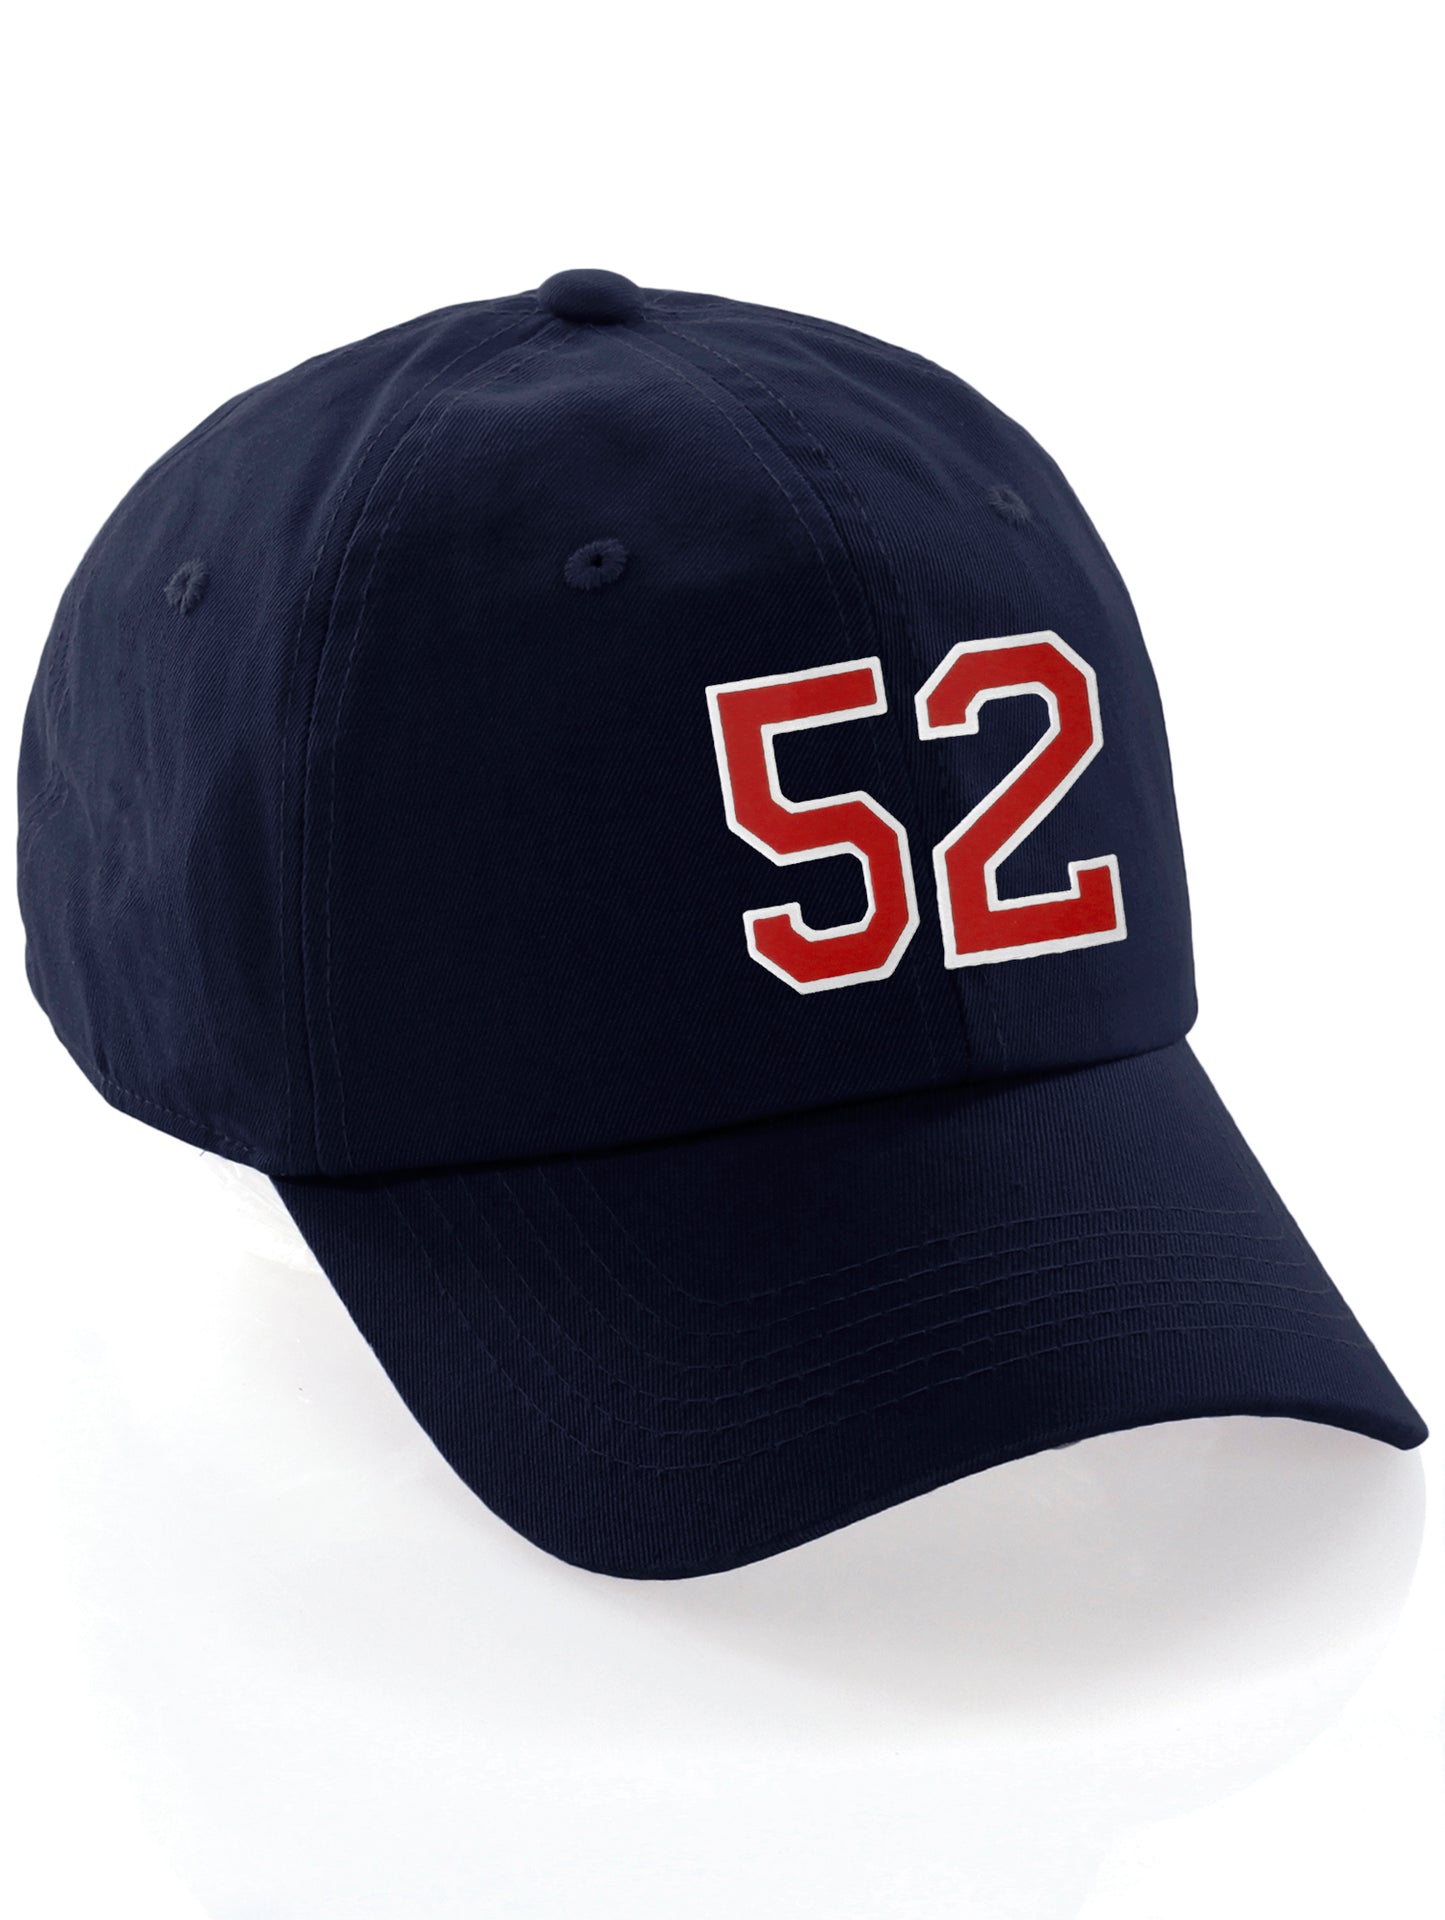 I&W Hatgear Customized Number Hat 00 to 99 Team Colors Baseball Cap, Navy Hat White Red